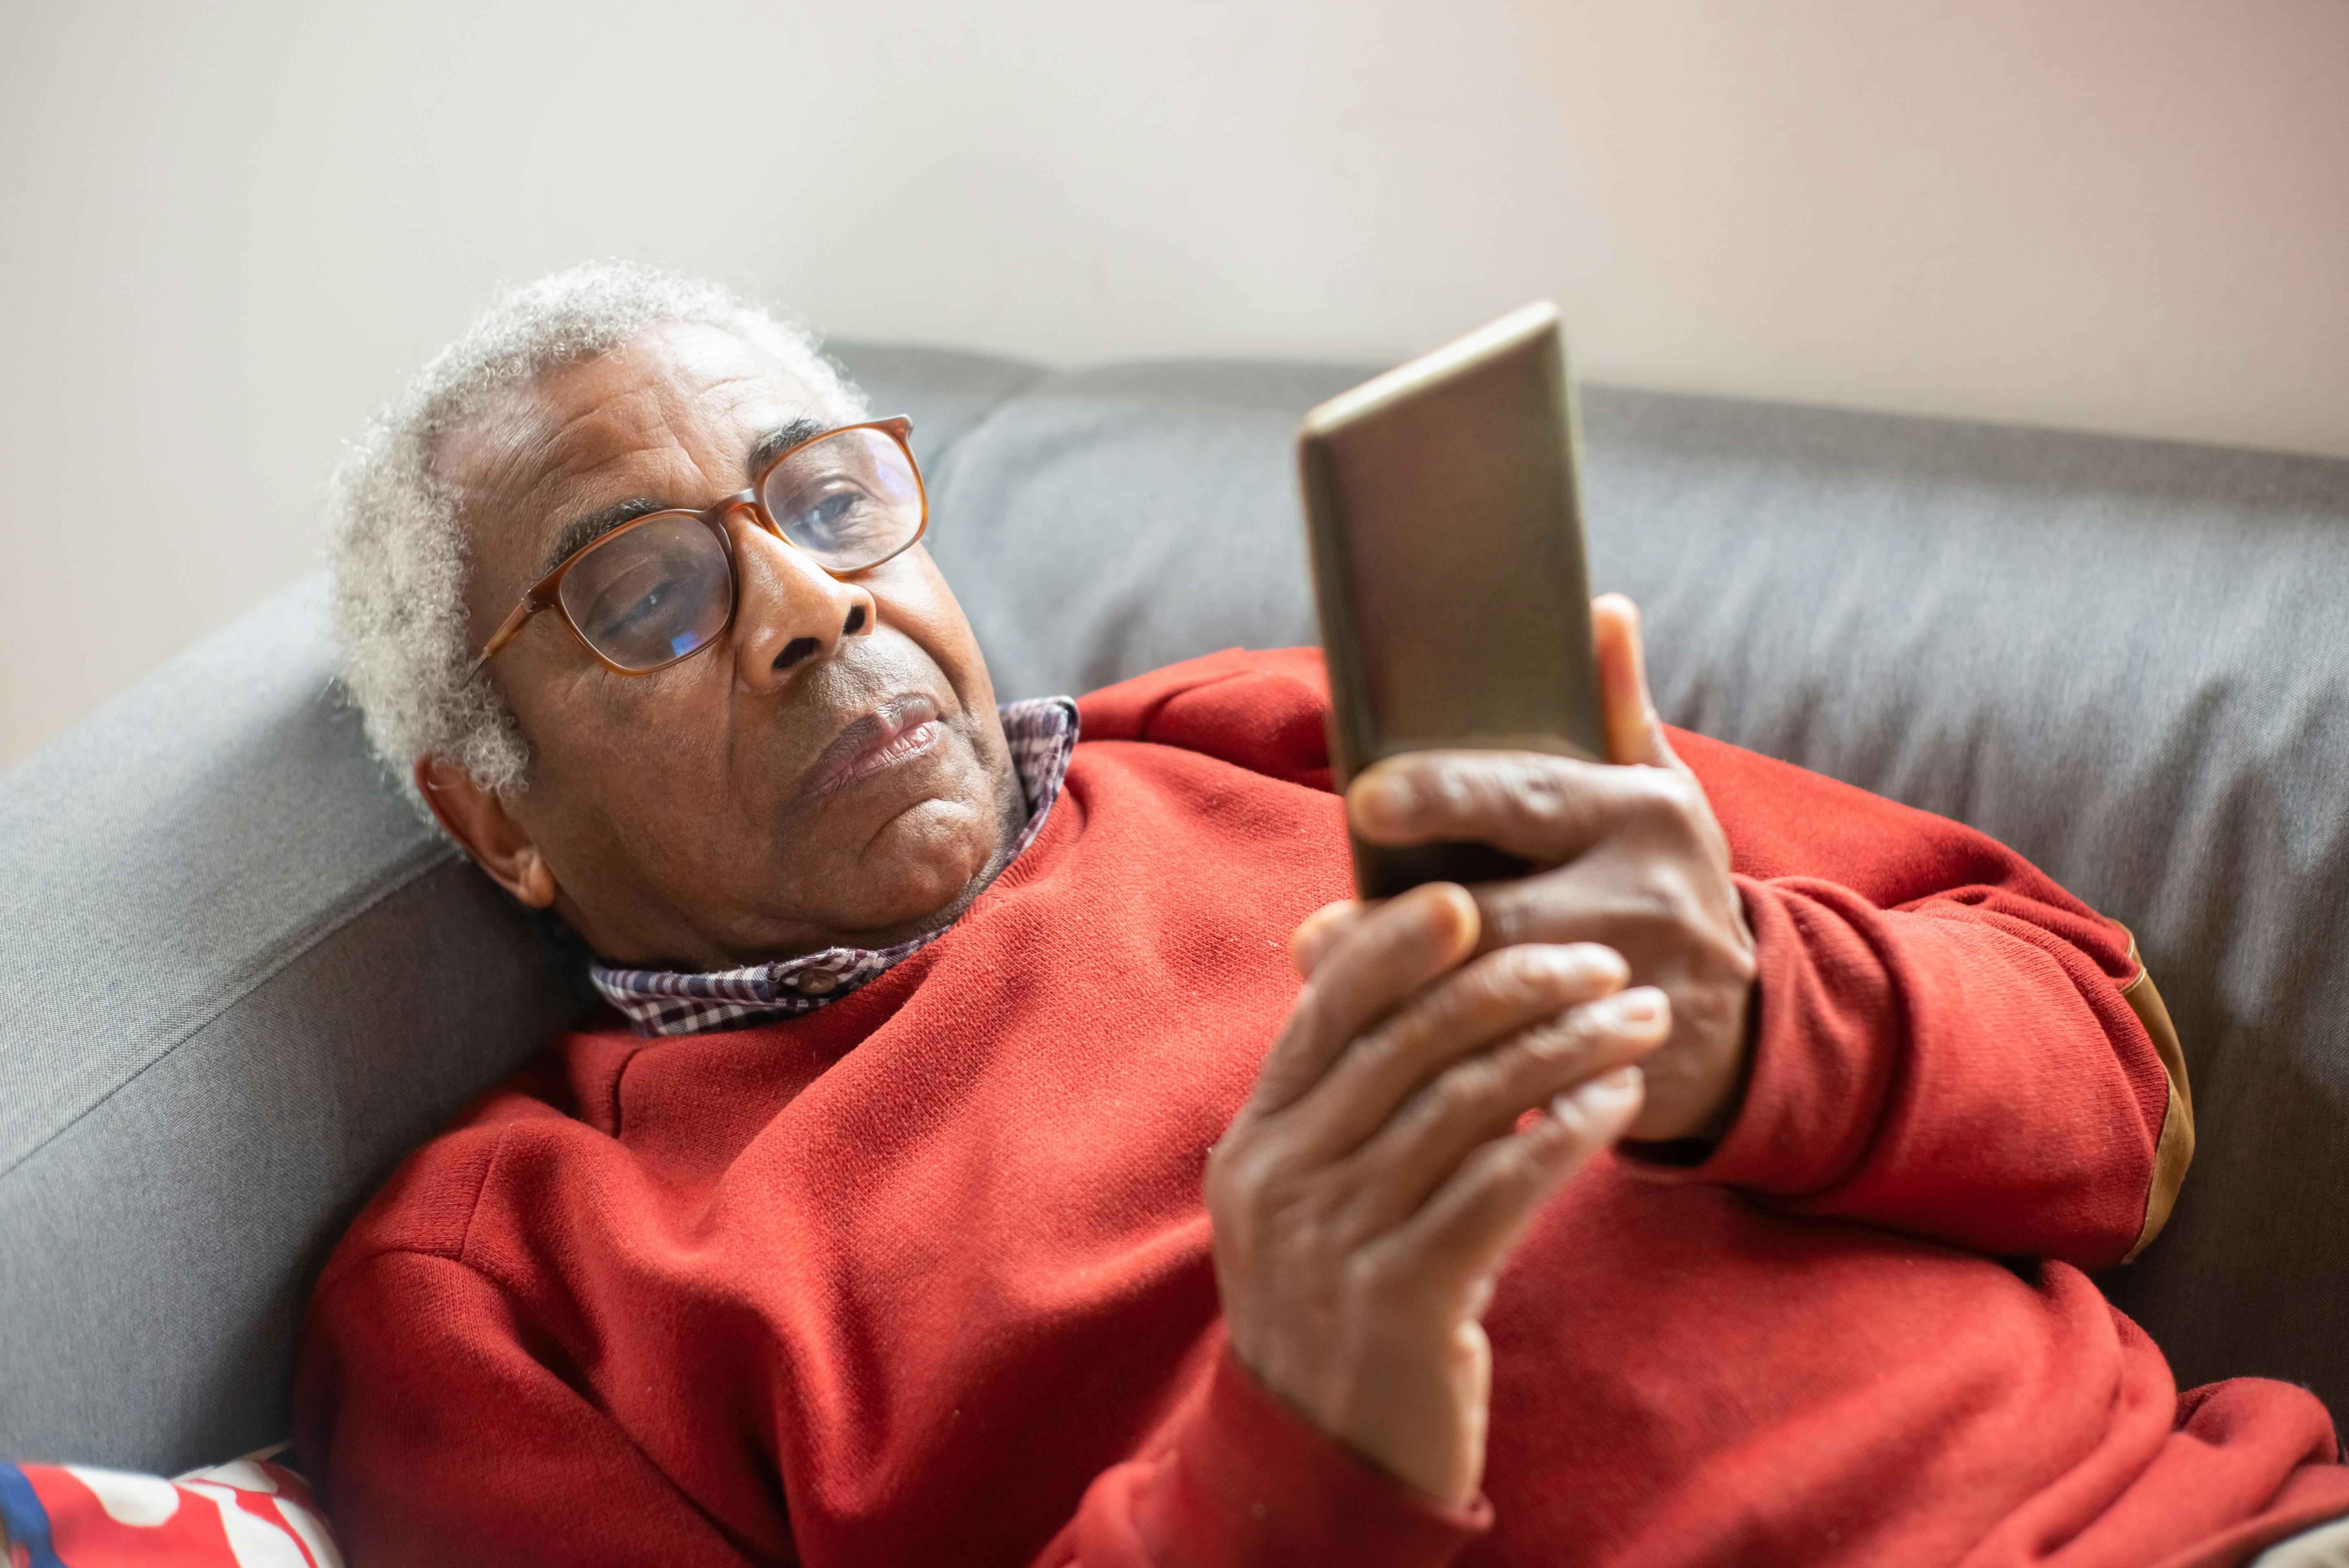 An elderly man reclines with a cell phone | Source: Pexels